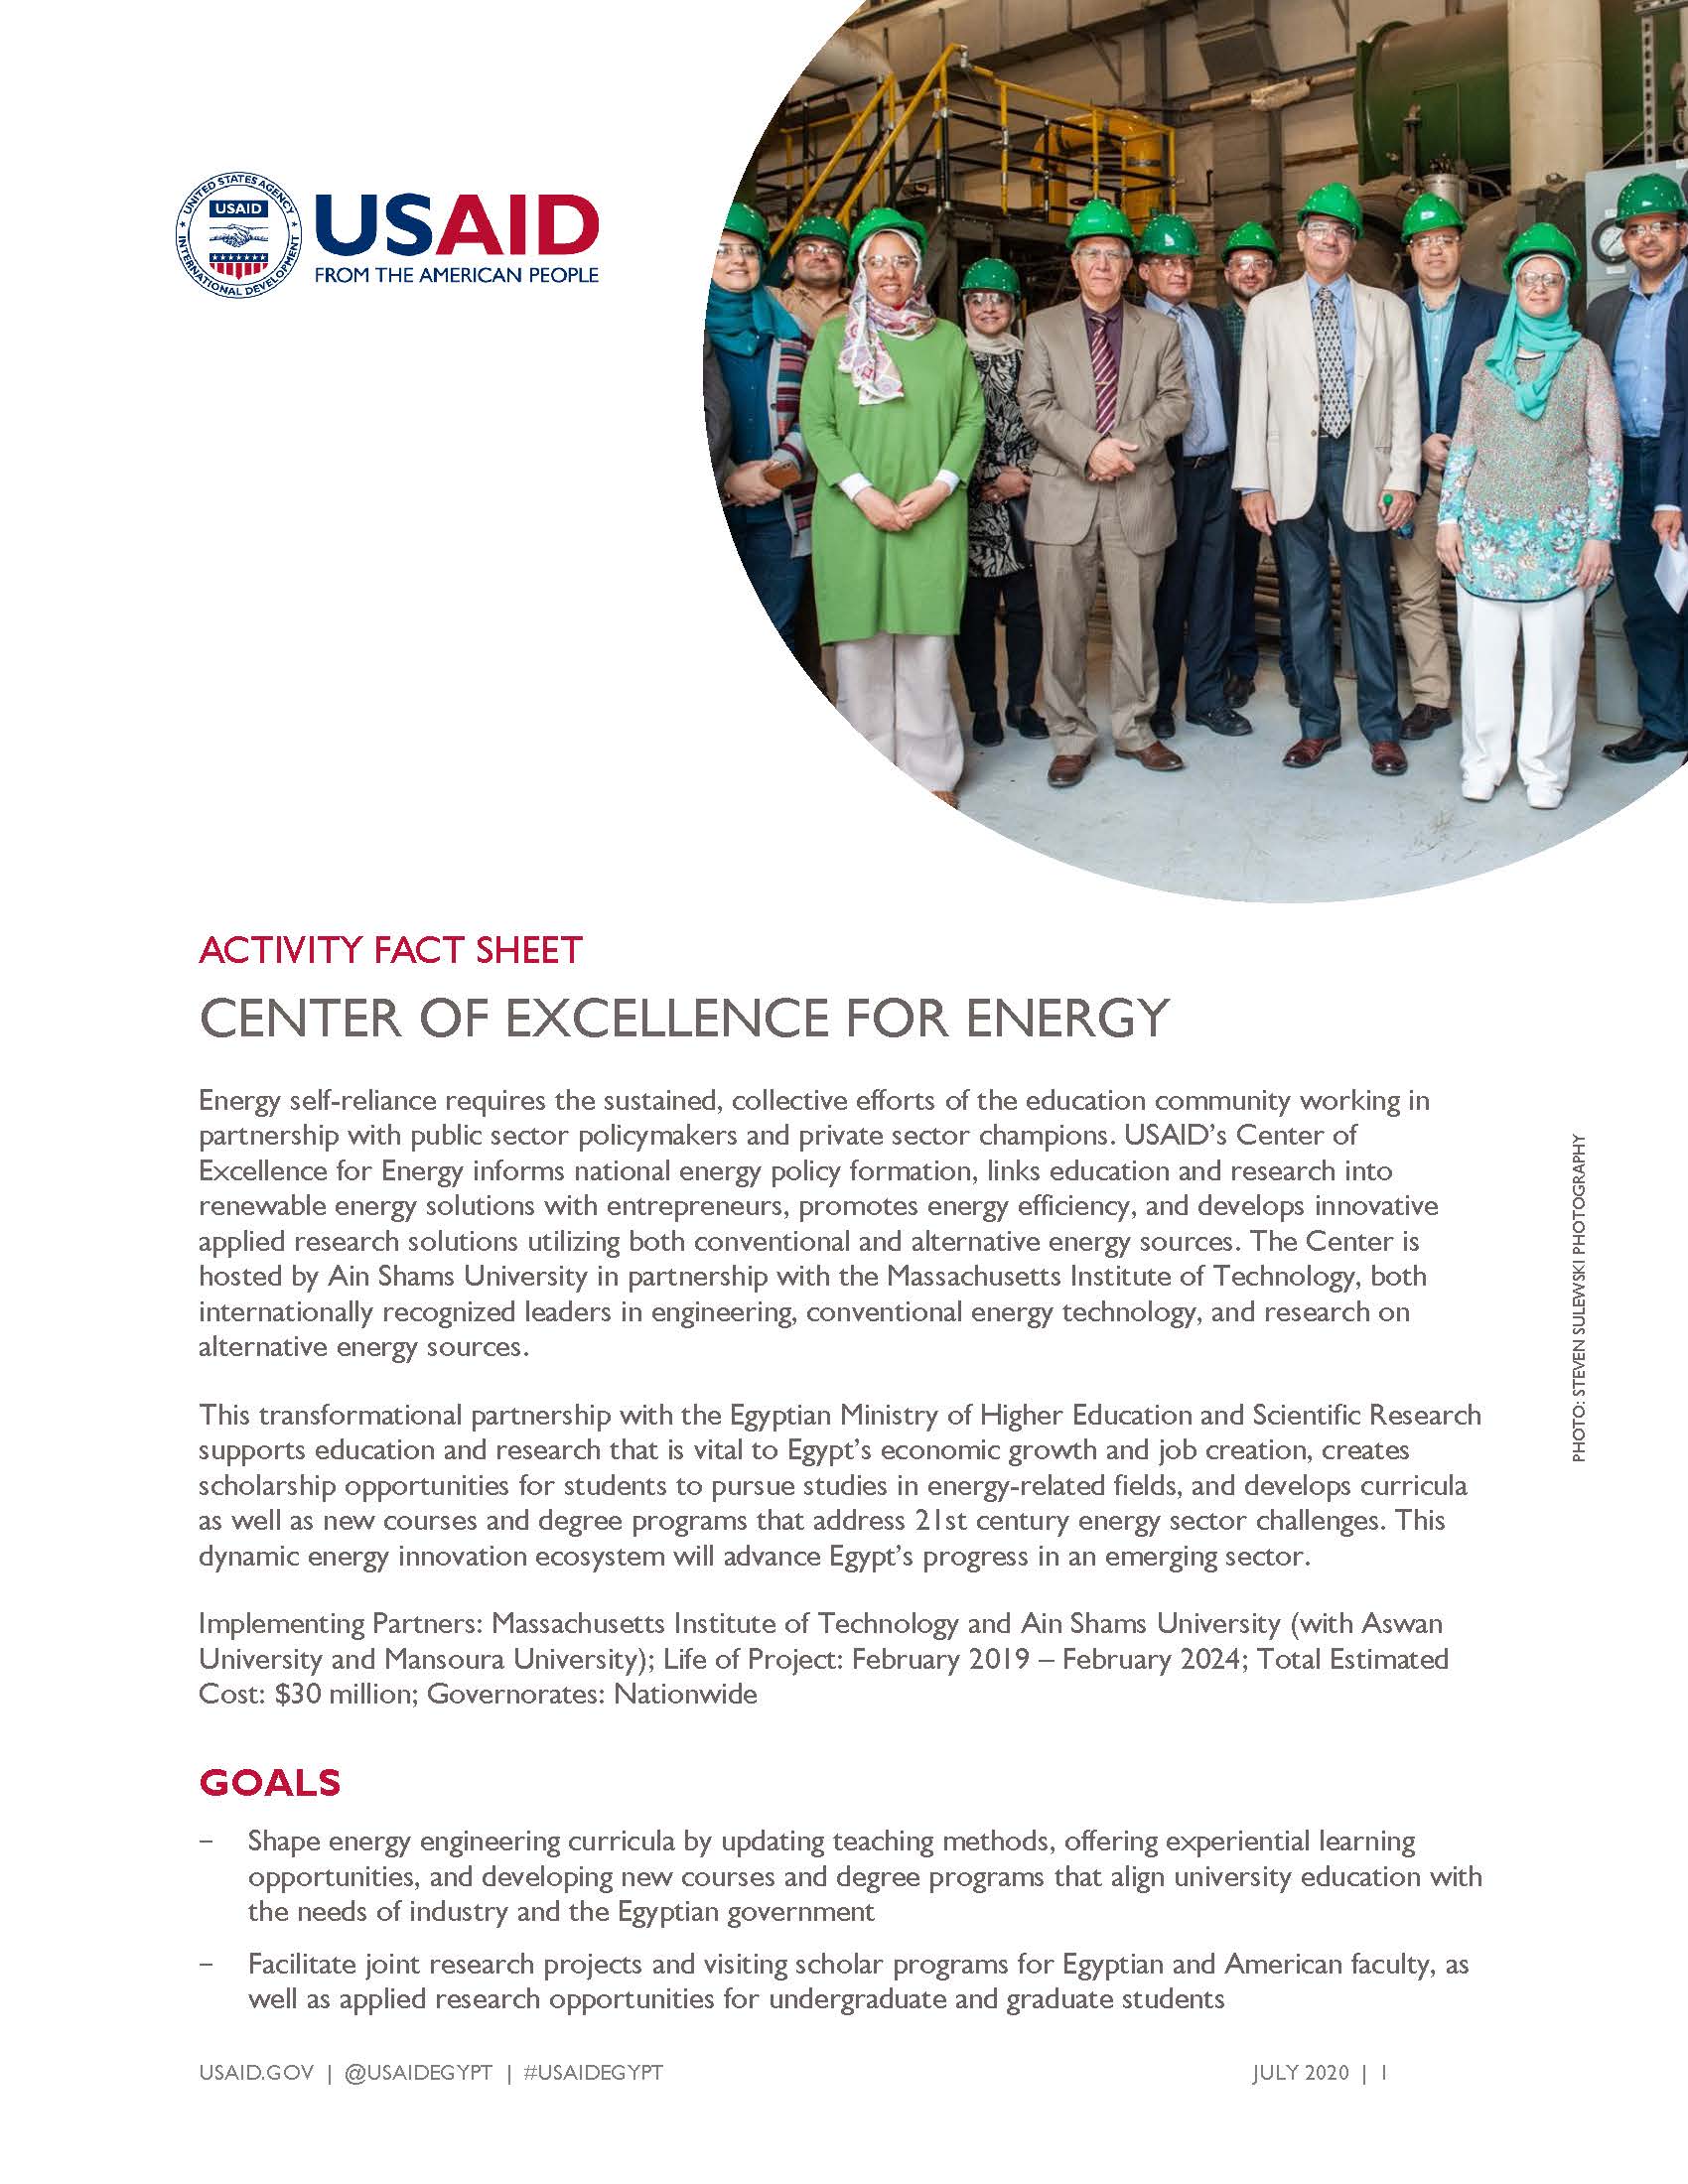 USAID/Egypt Activity Fact Sheet: Center of Excellence for Energy